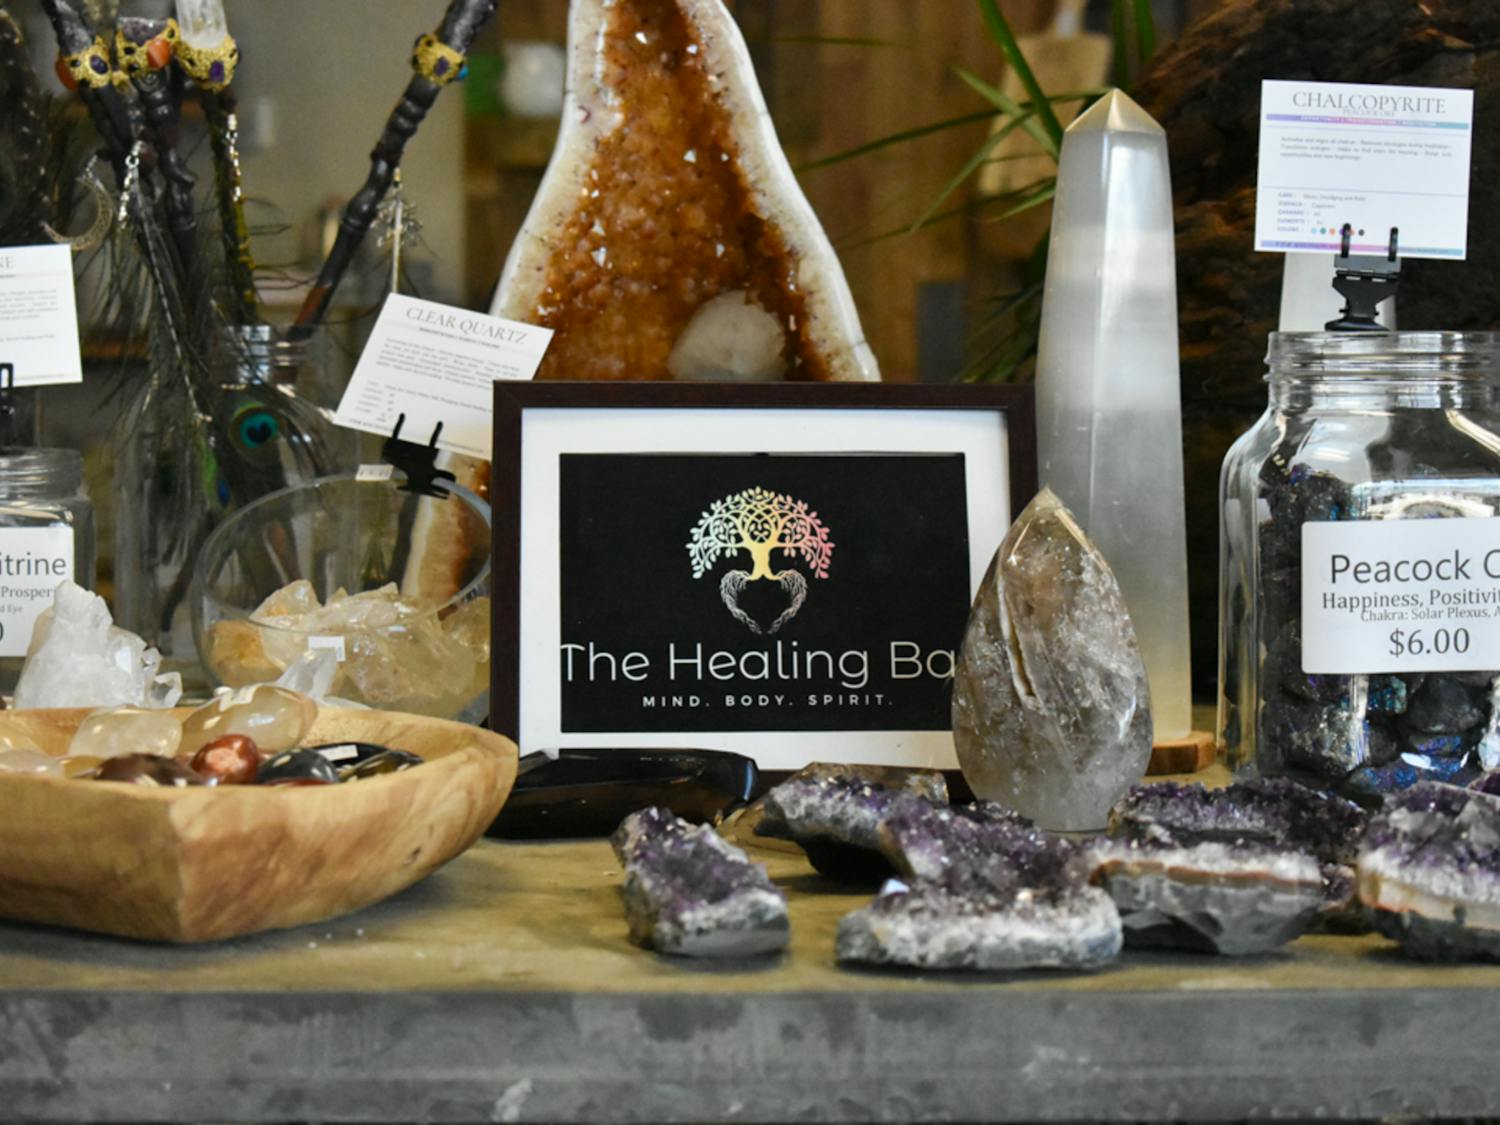 For some members of the Columbia community, crystals have become a new tool to improving mental health. One shop, The Healing Bar, and its owner affirm that crystals and metaphysics serve as an emotional outlet and tool for improving mental health.